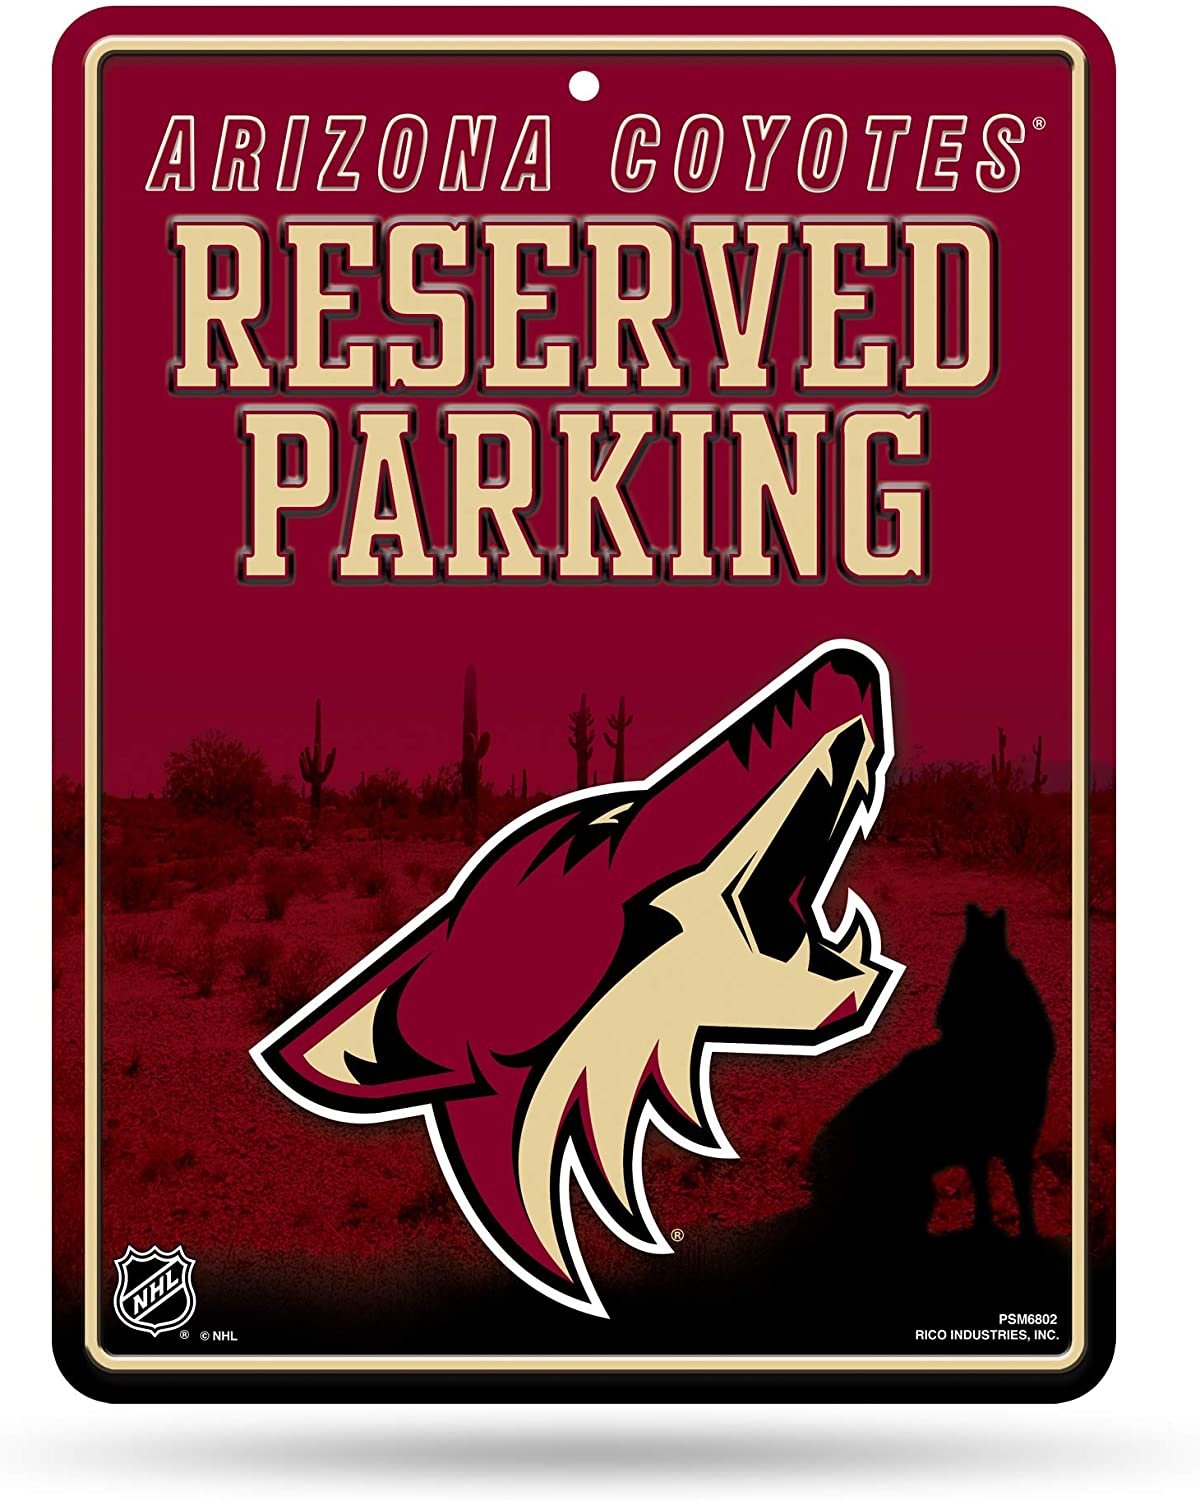 Arizona Coyotes 8-Inch by 11-Inch Metal Parking Sign Décor